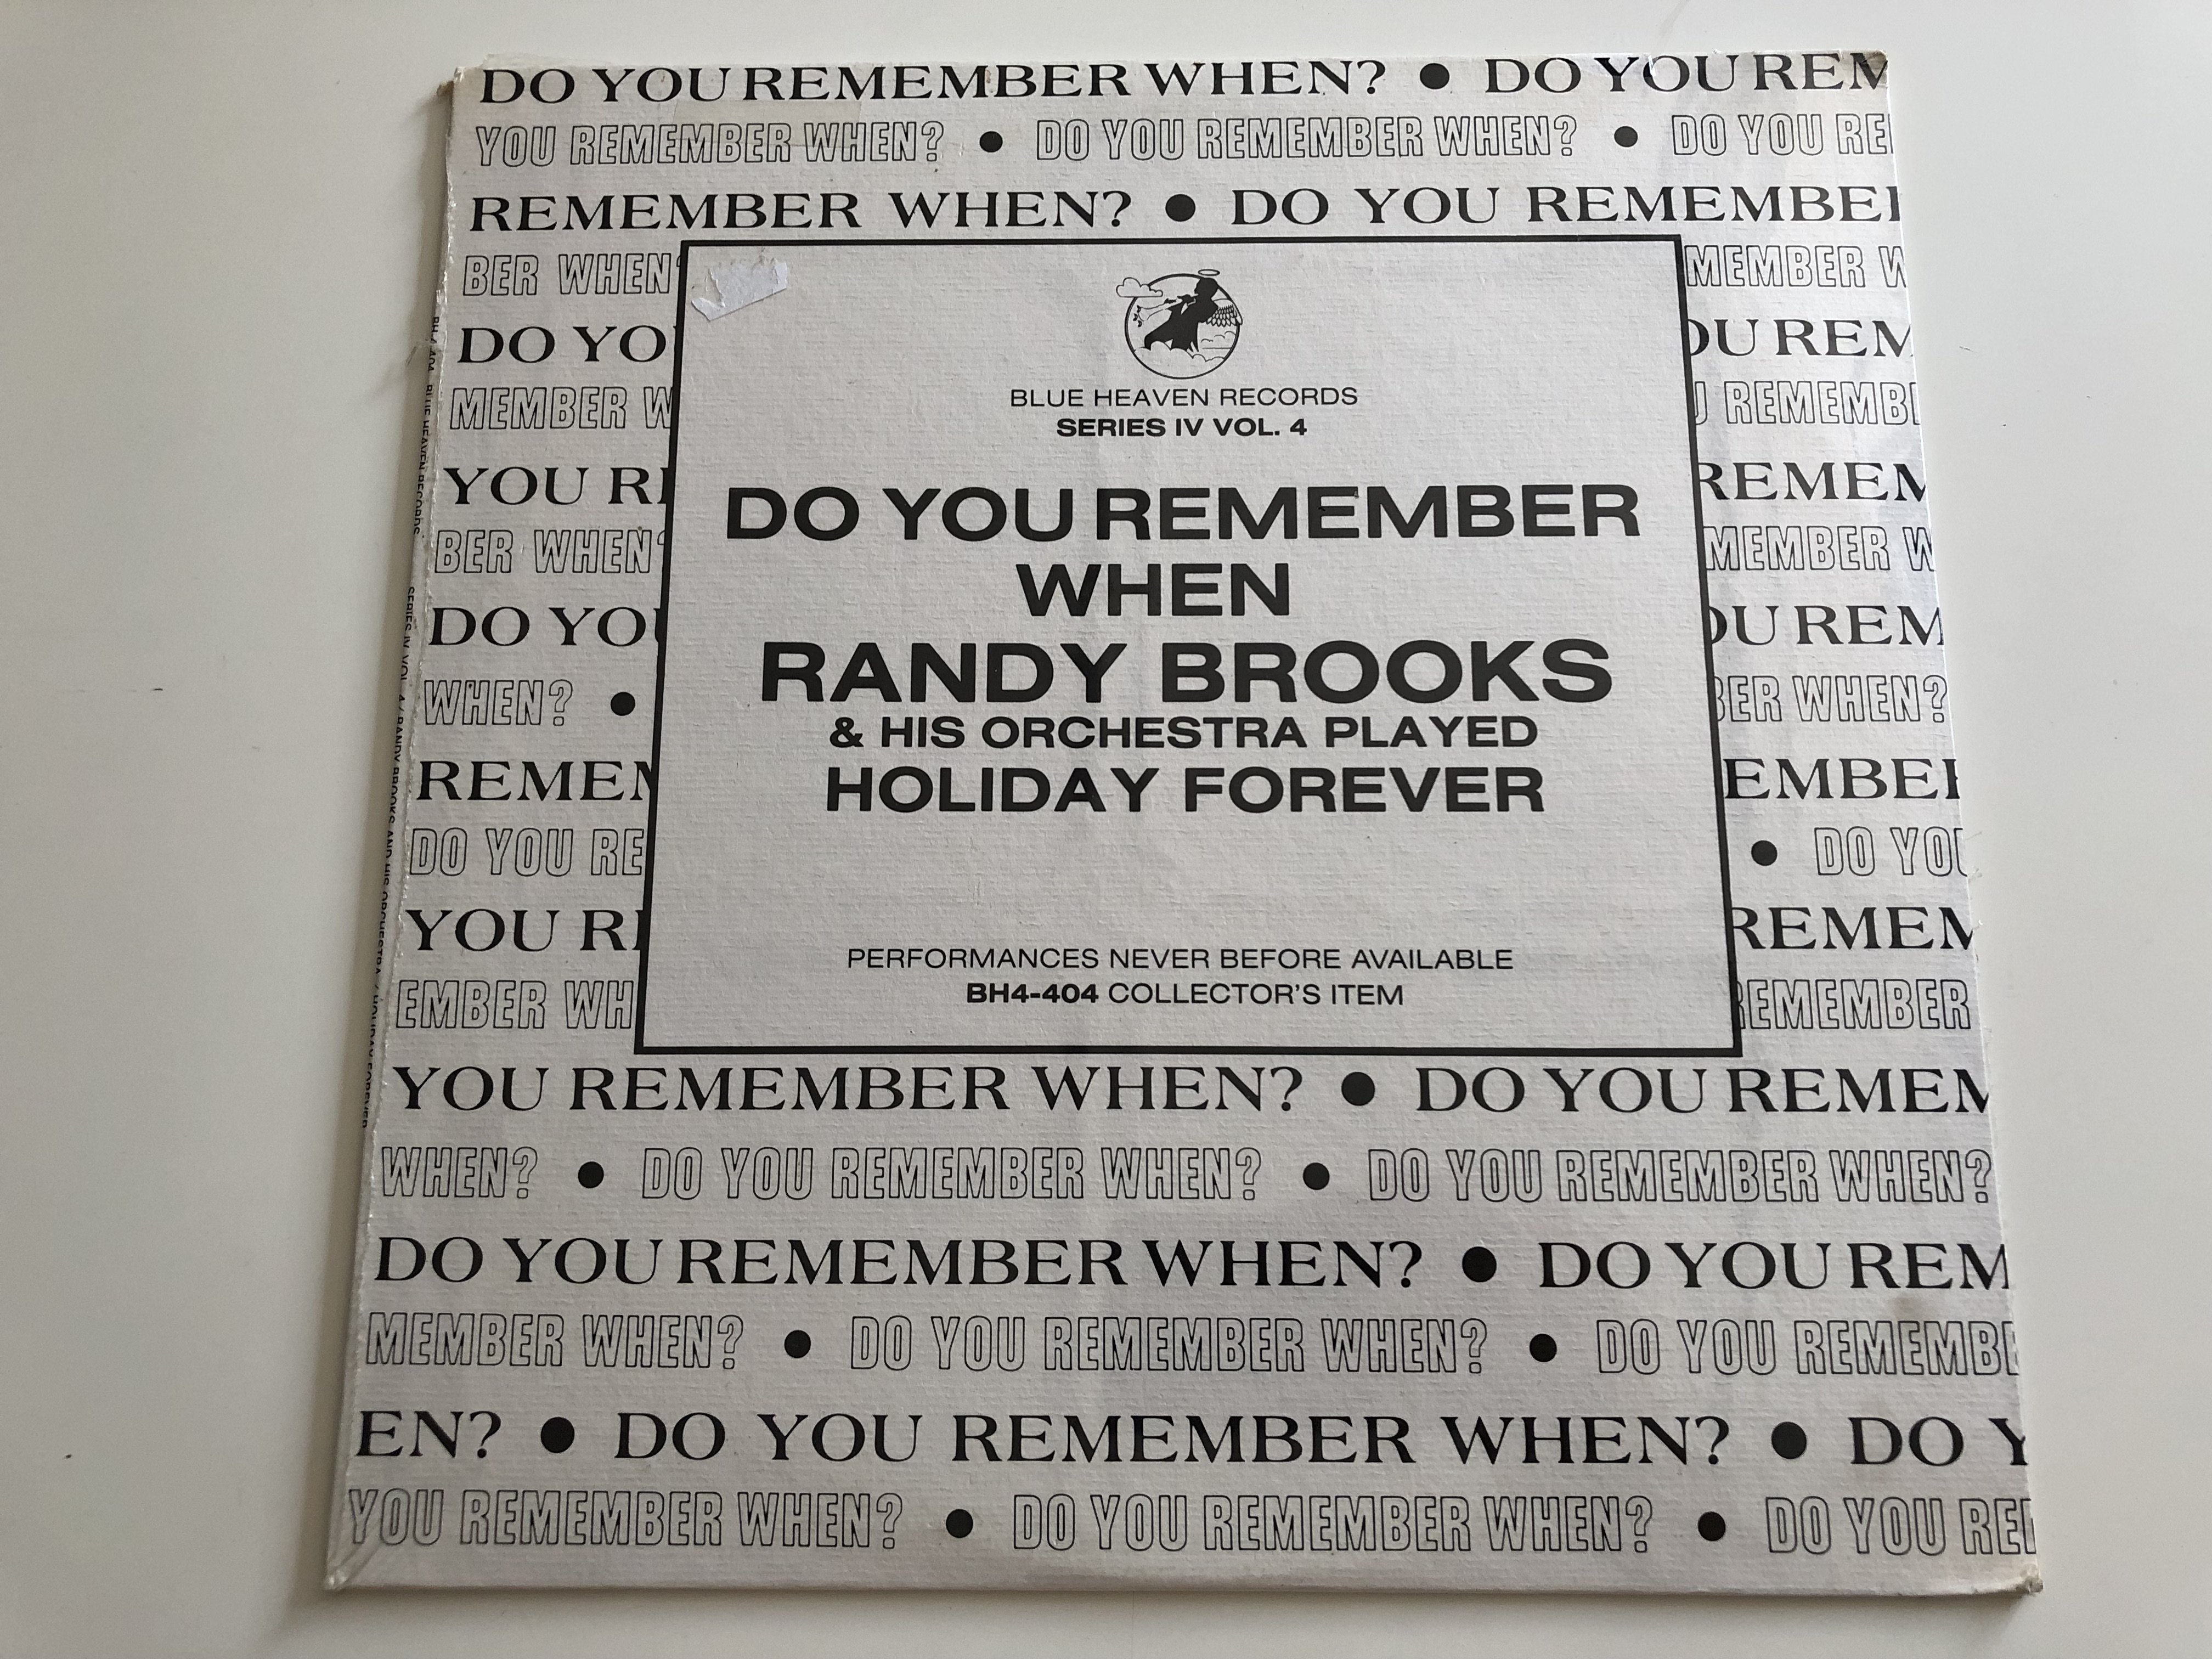 do-you-remember-when-randy-brooks-his-orchestra-played-holiday-forever-performances-never-before-available-blue-heaven-records-lp-bh4-404-1-.jpg